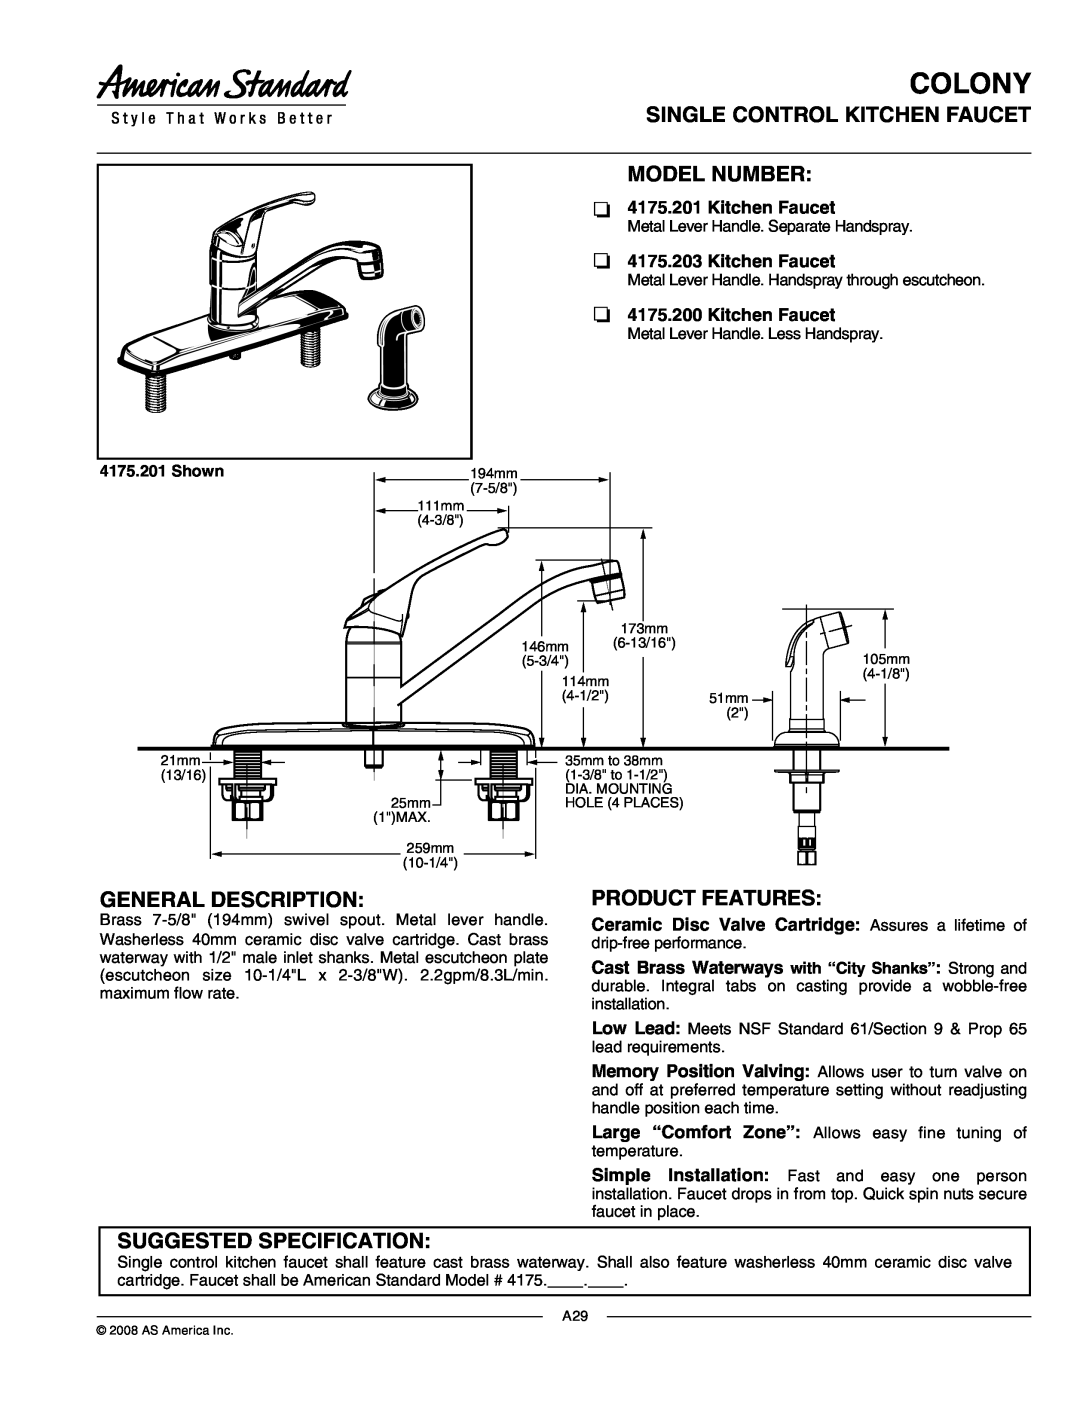 American Standard 4175.203 specifications Colony, Single Control Kitchen Faucet Model Number, General Description, Shown 